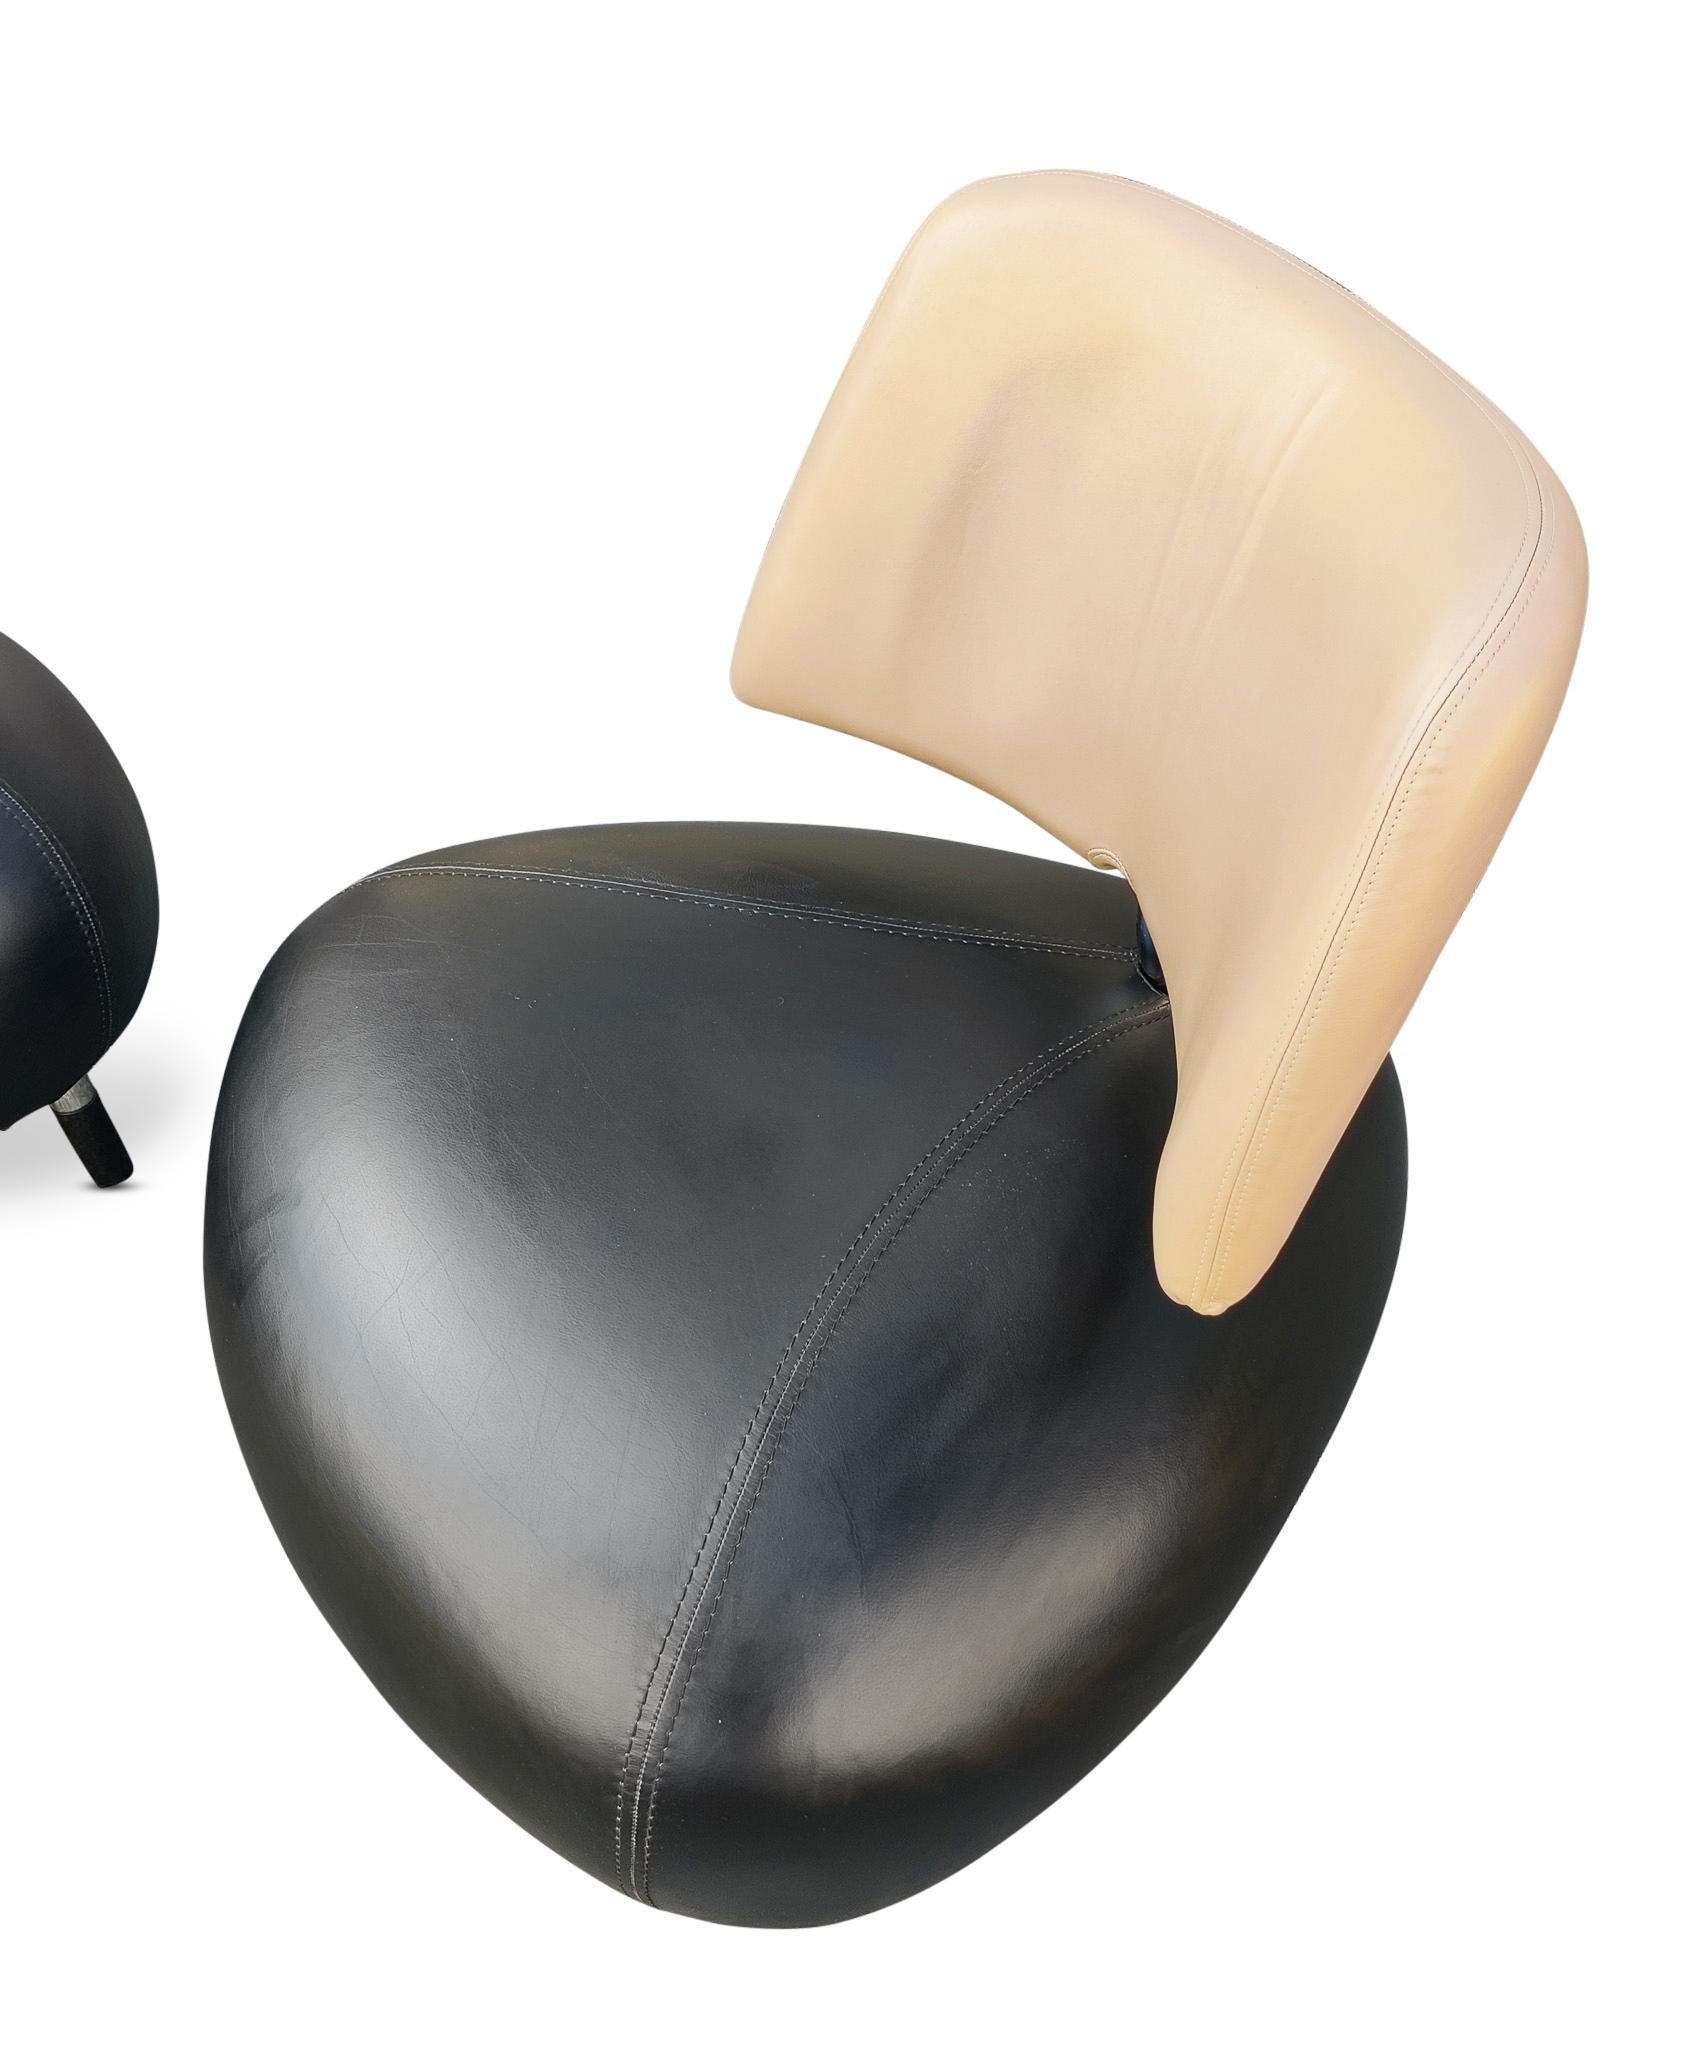 Pallone Leather Lounge Chairs Pair, by Roy de Scheemaker for Leolux, Post-Modern 2